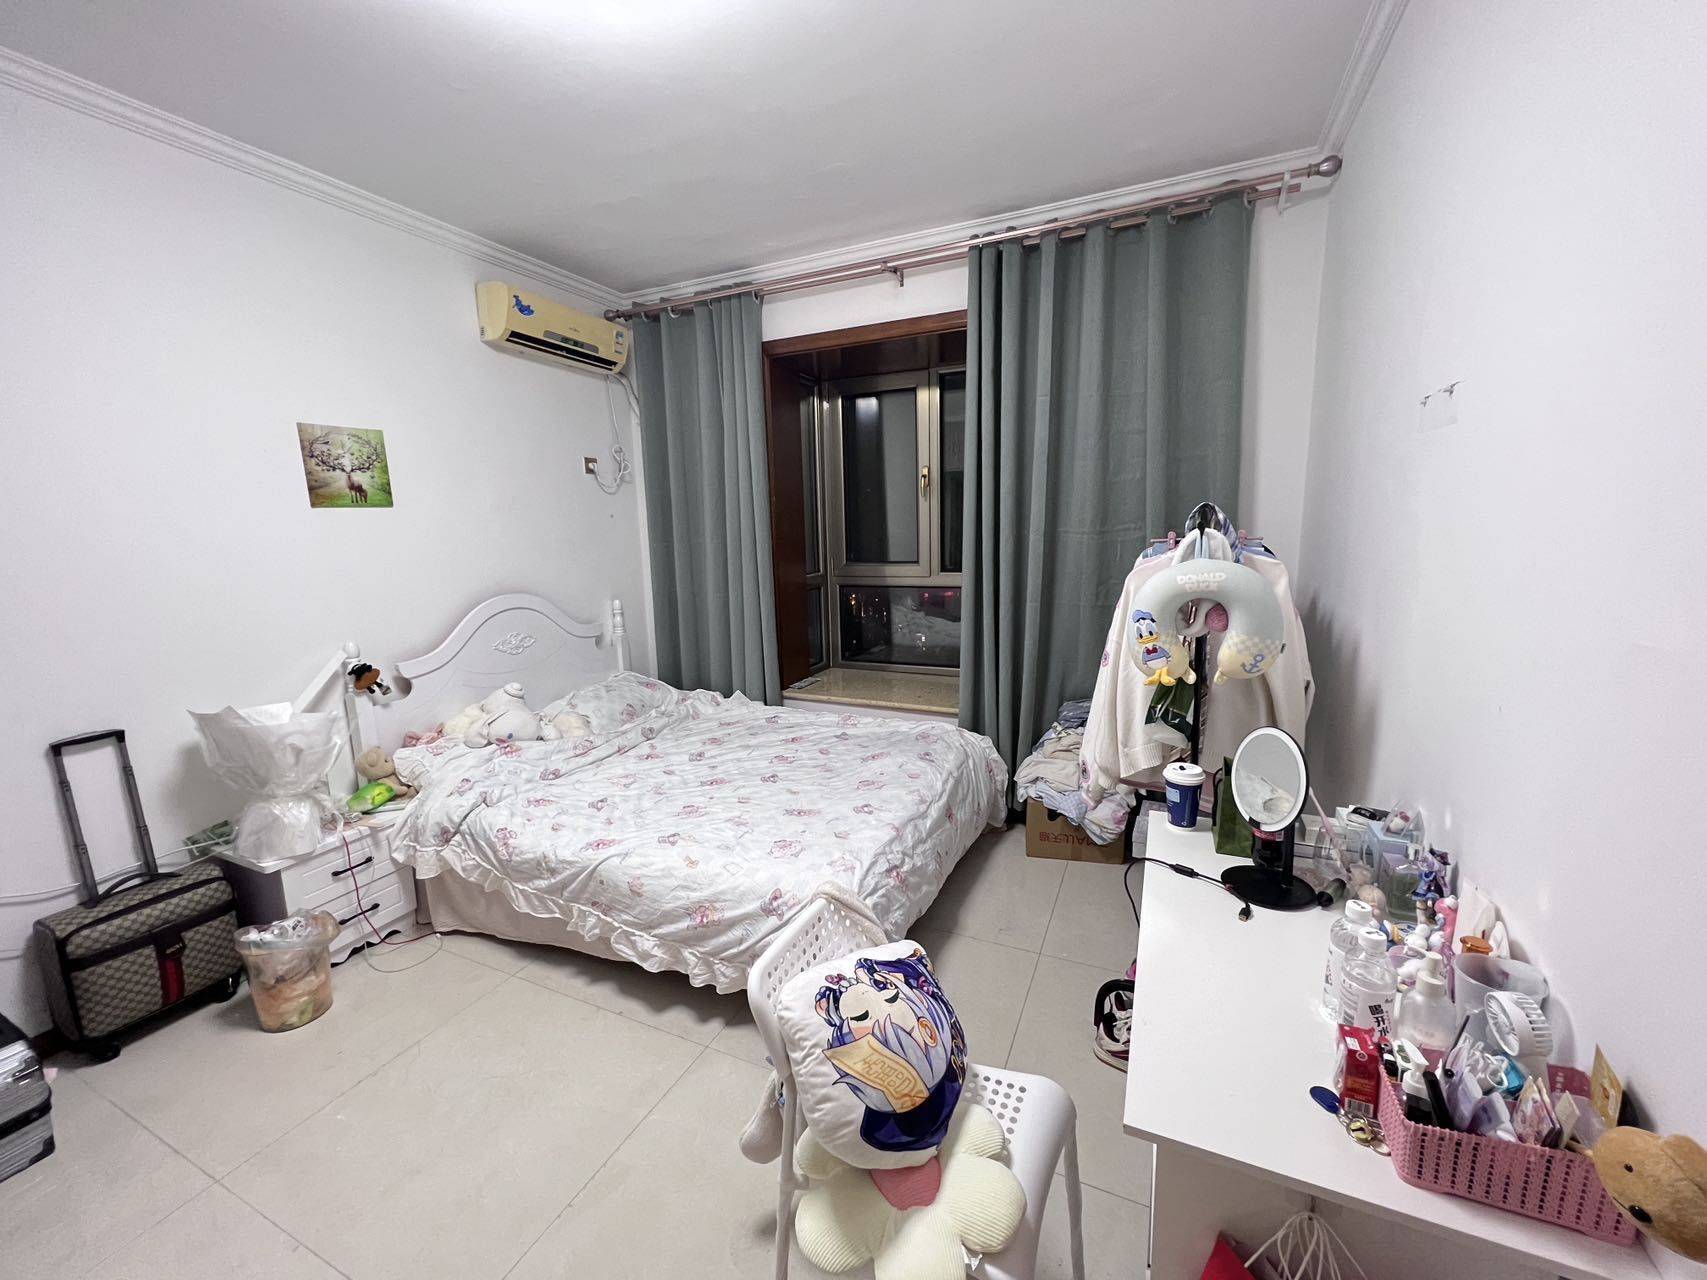 Xi'An-Yanta-300RMB/Night,Cozy Home,Clean&Comfy,No Gender Limit,Chilled,Pet Friendly